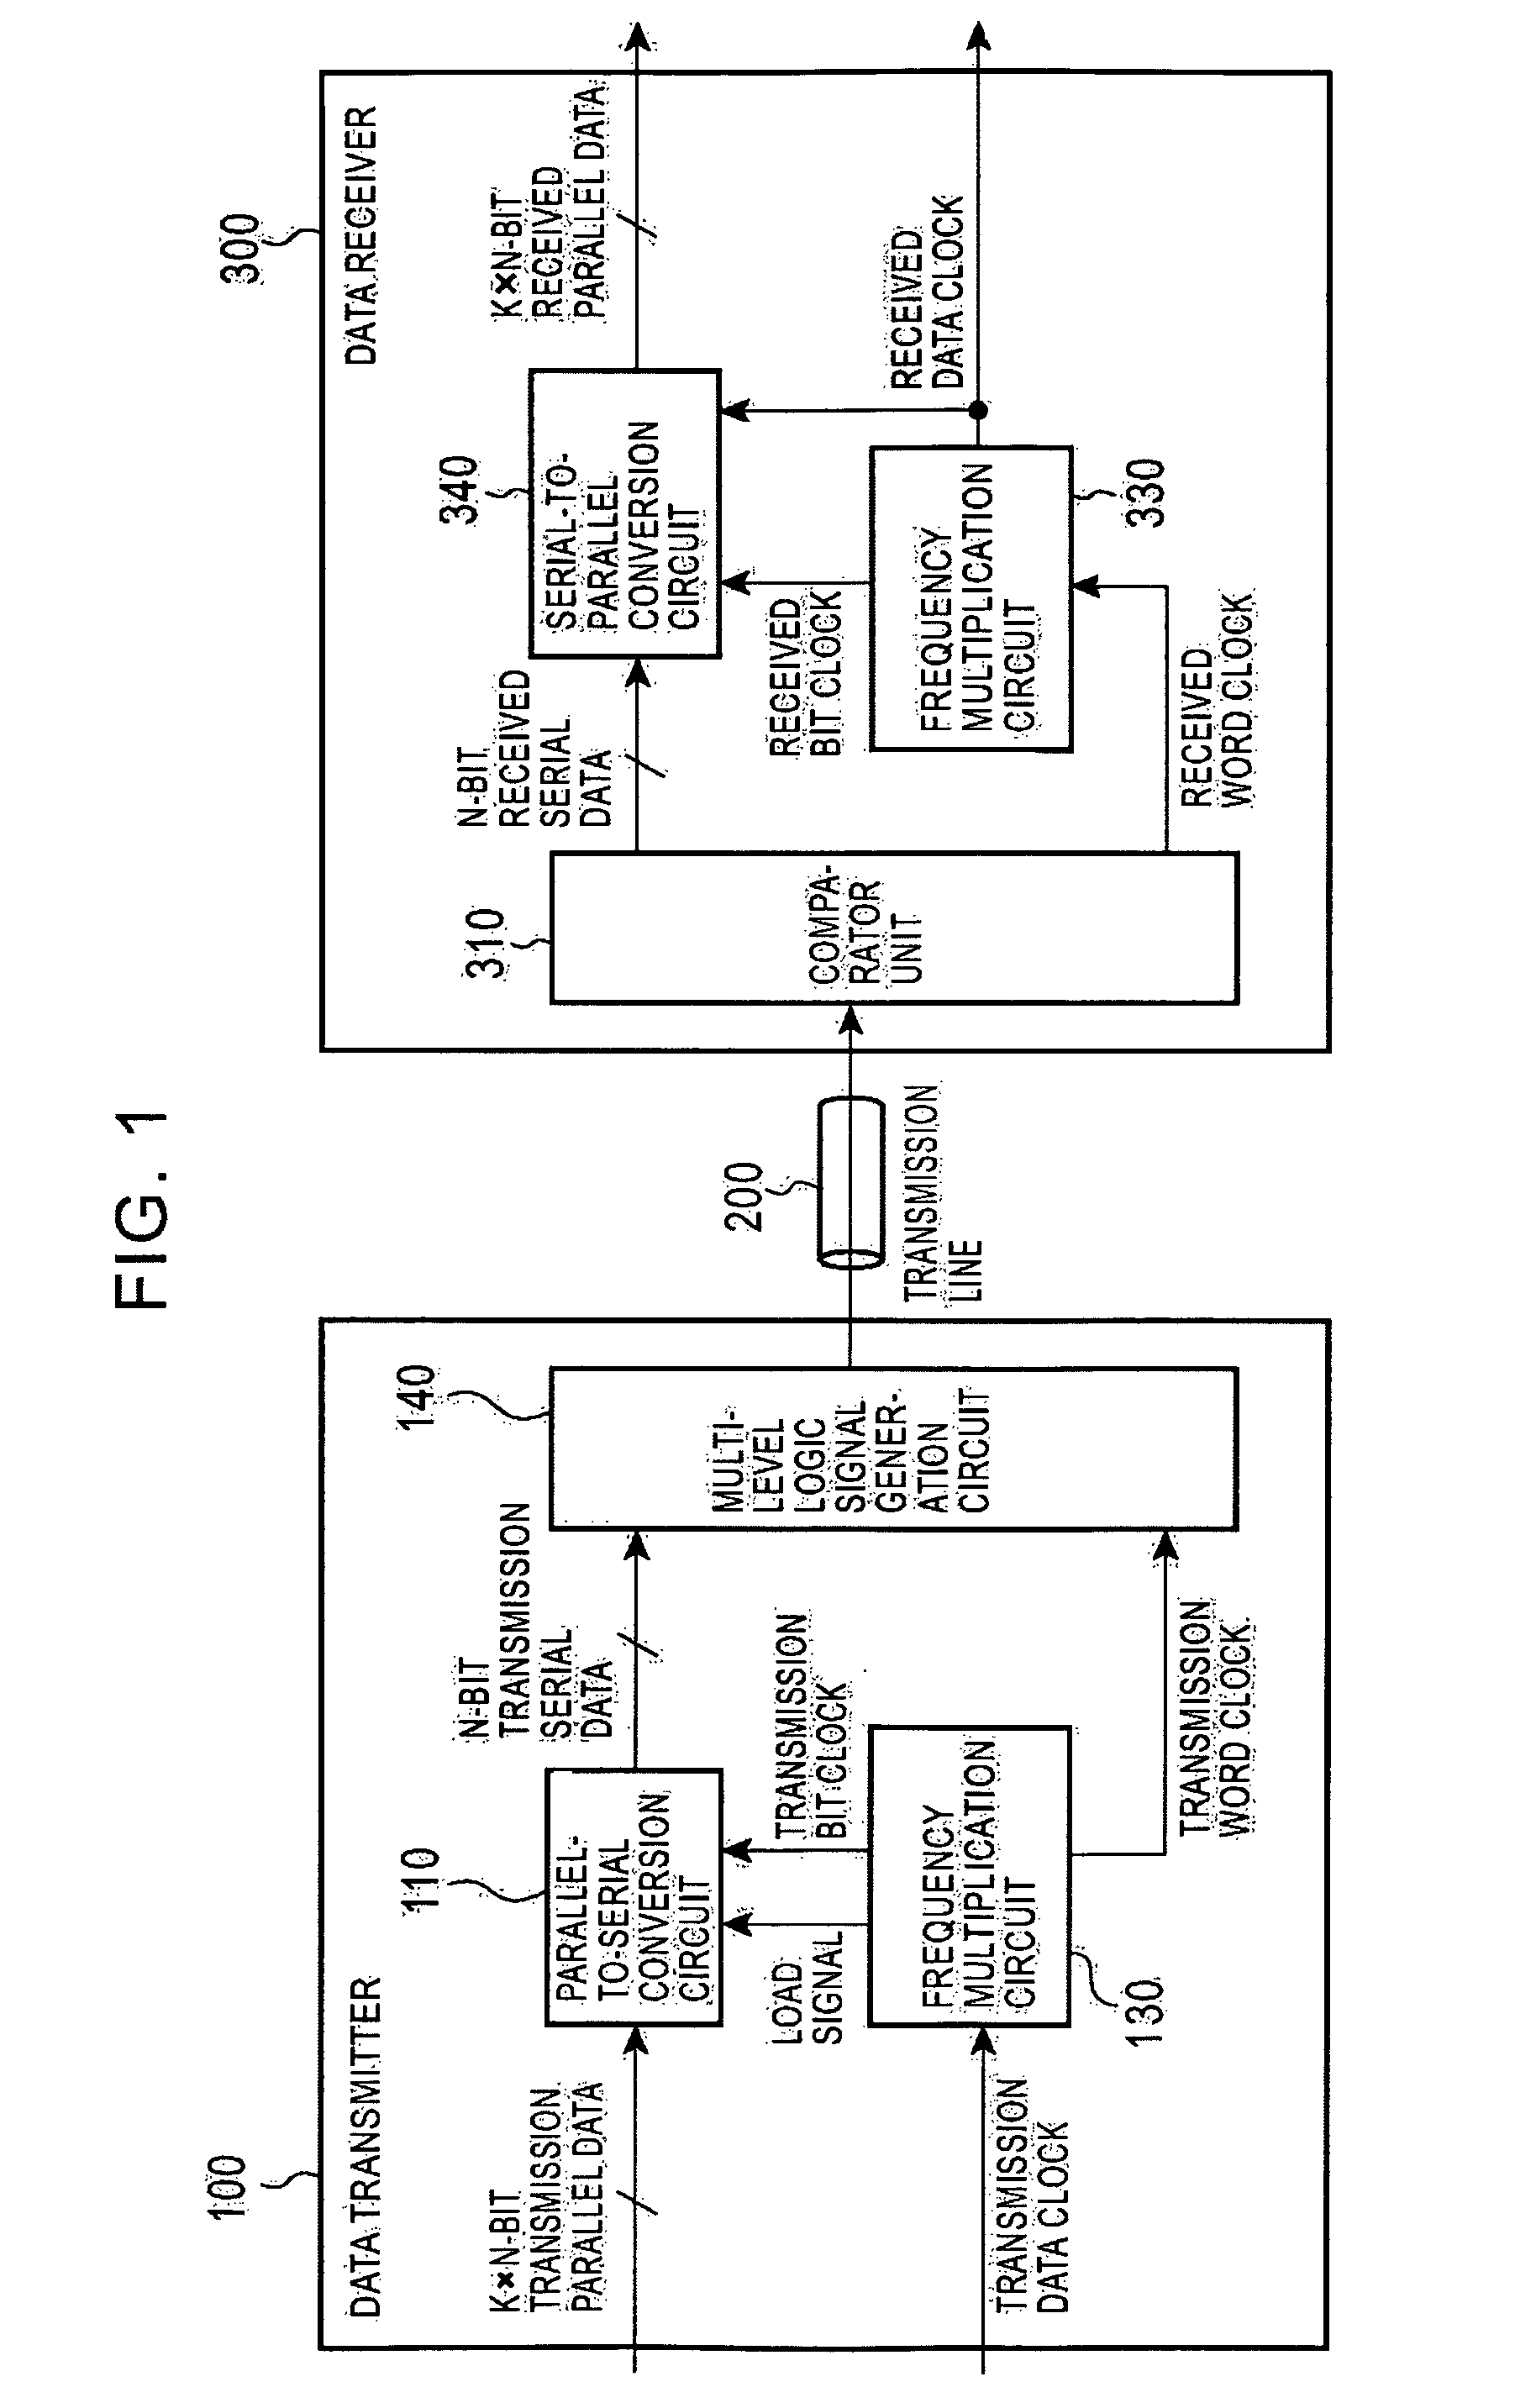 Systems and method for transfering digital data and transfering parallel digital data in a serial data stream including clock information